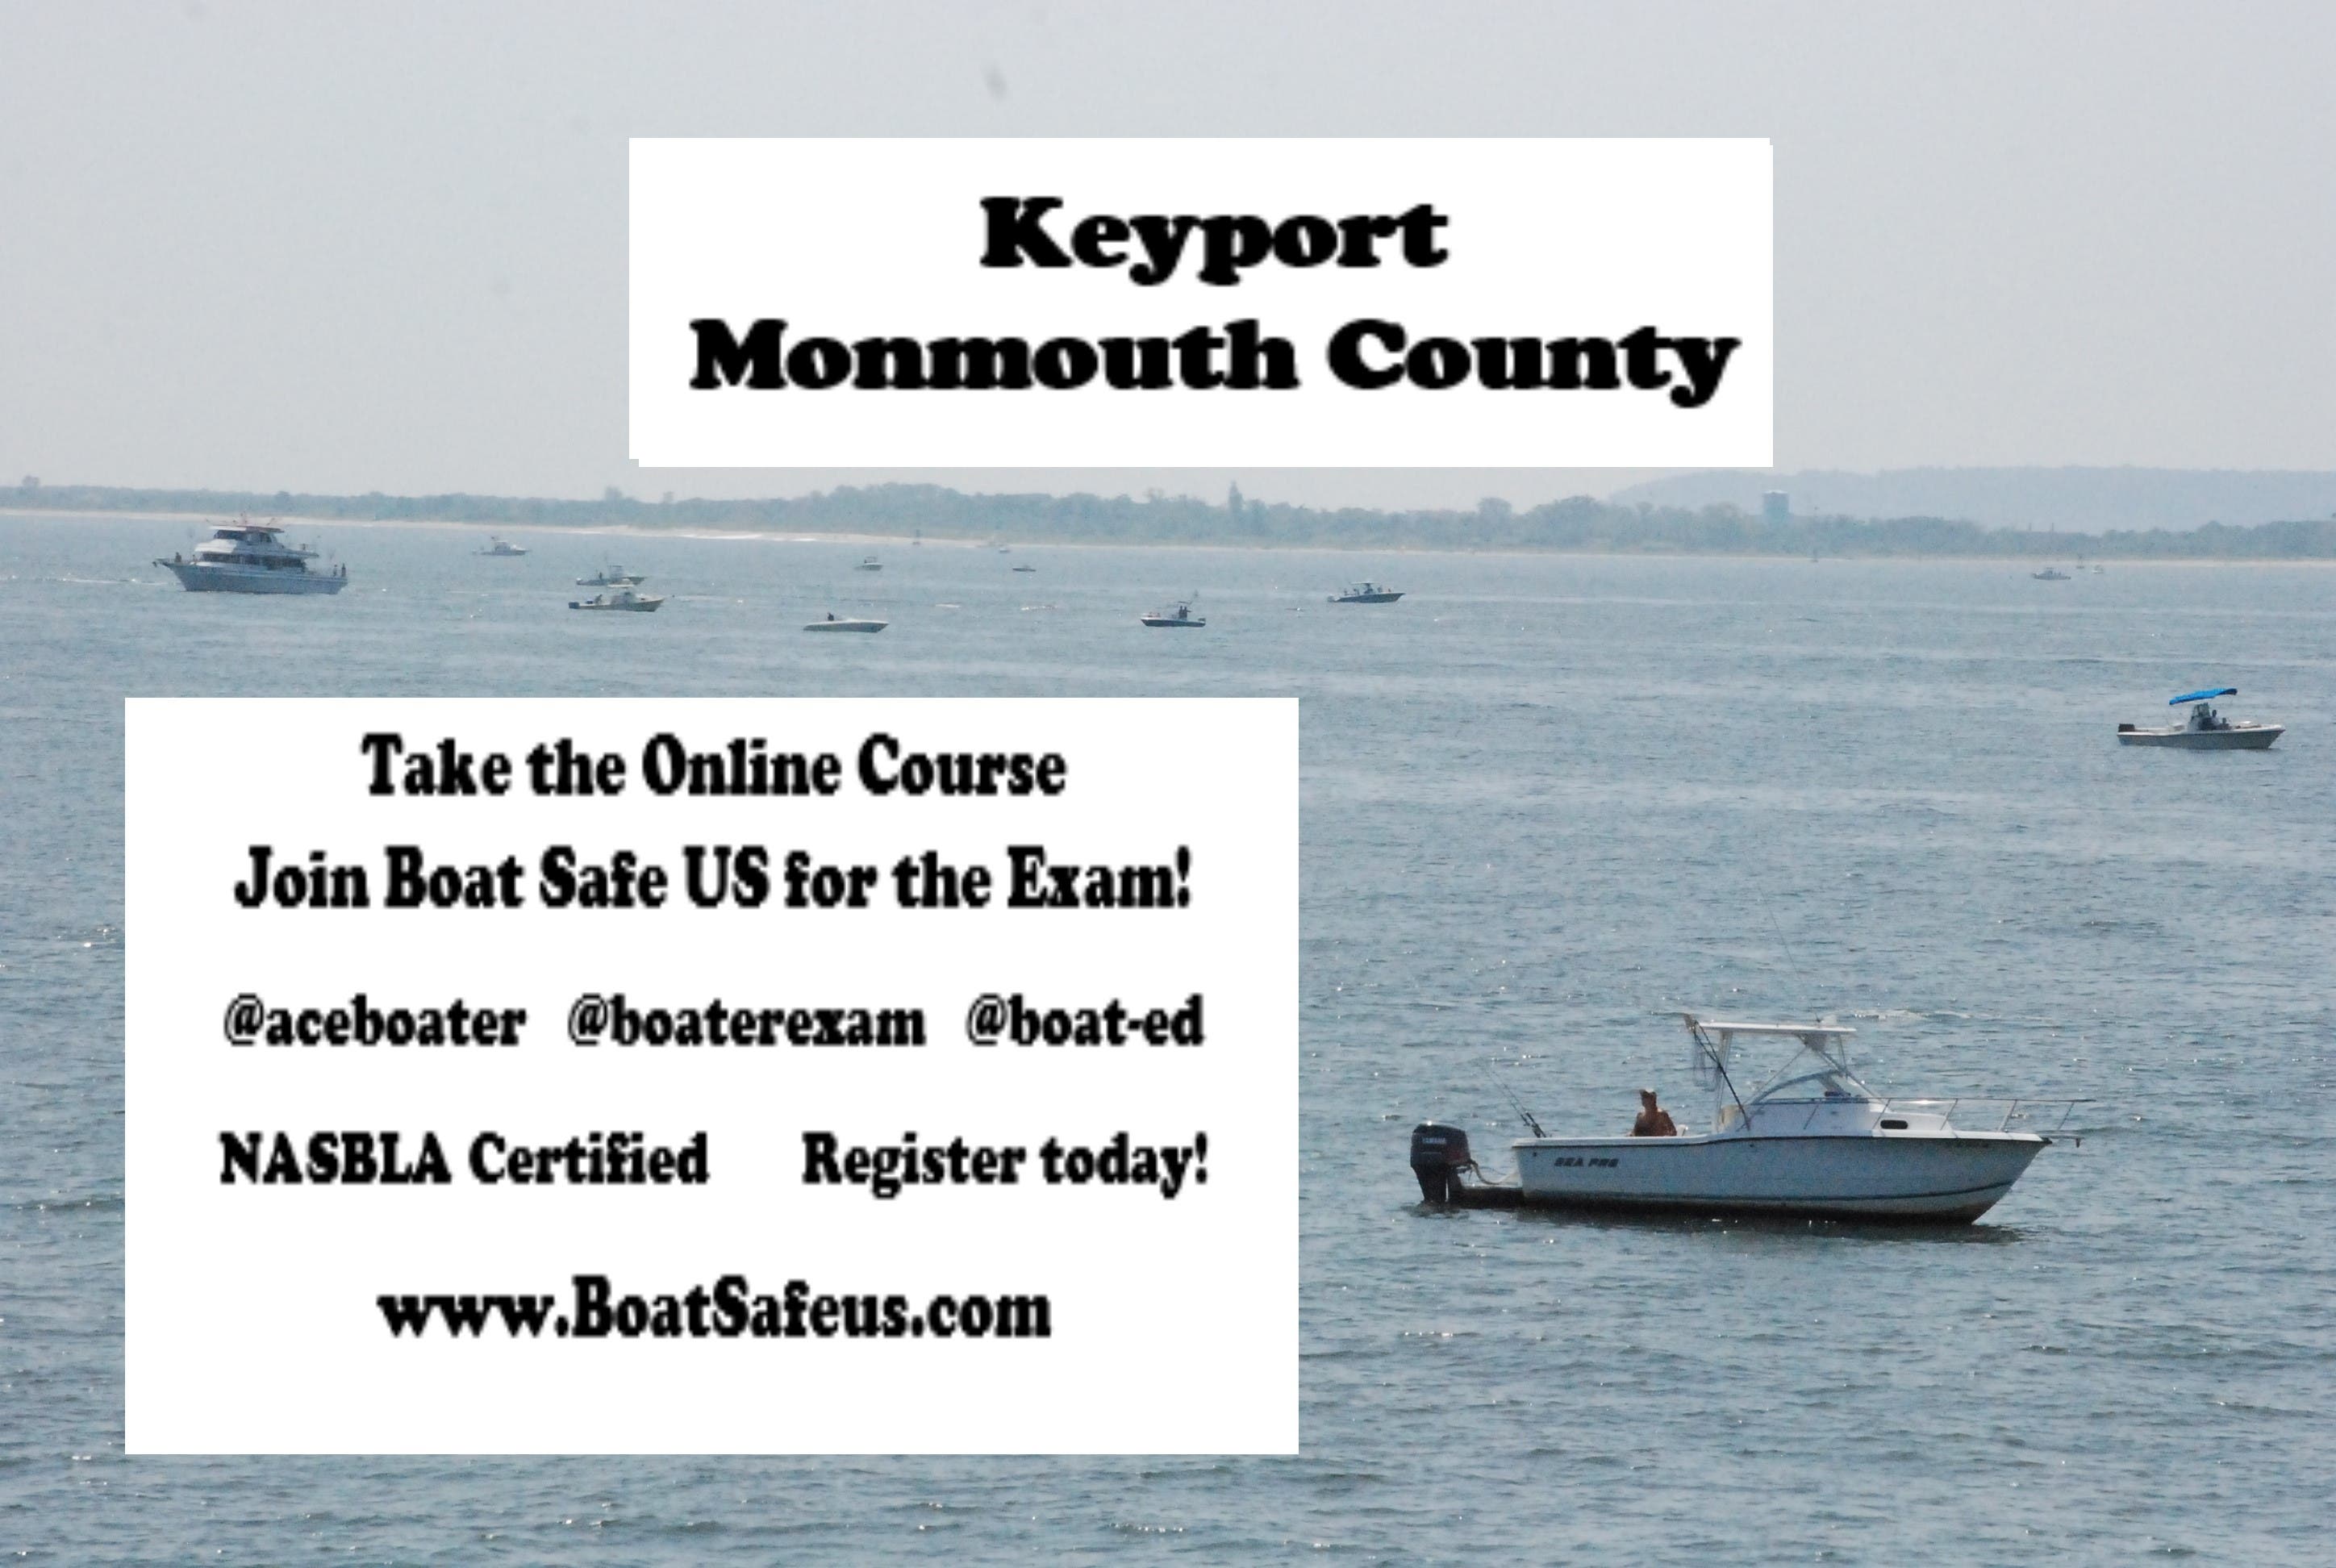 NJ Boat Safety Exam in Keyport at 5:00pm!